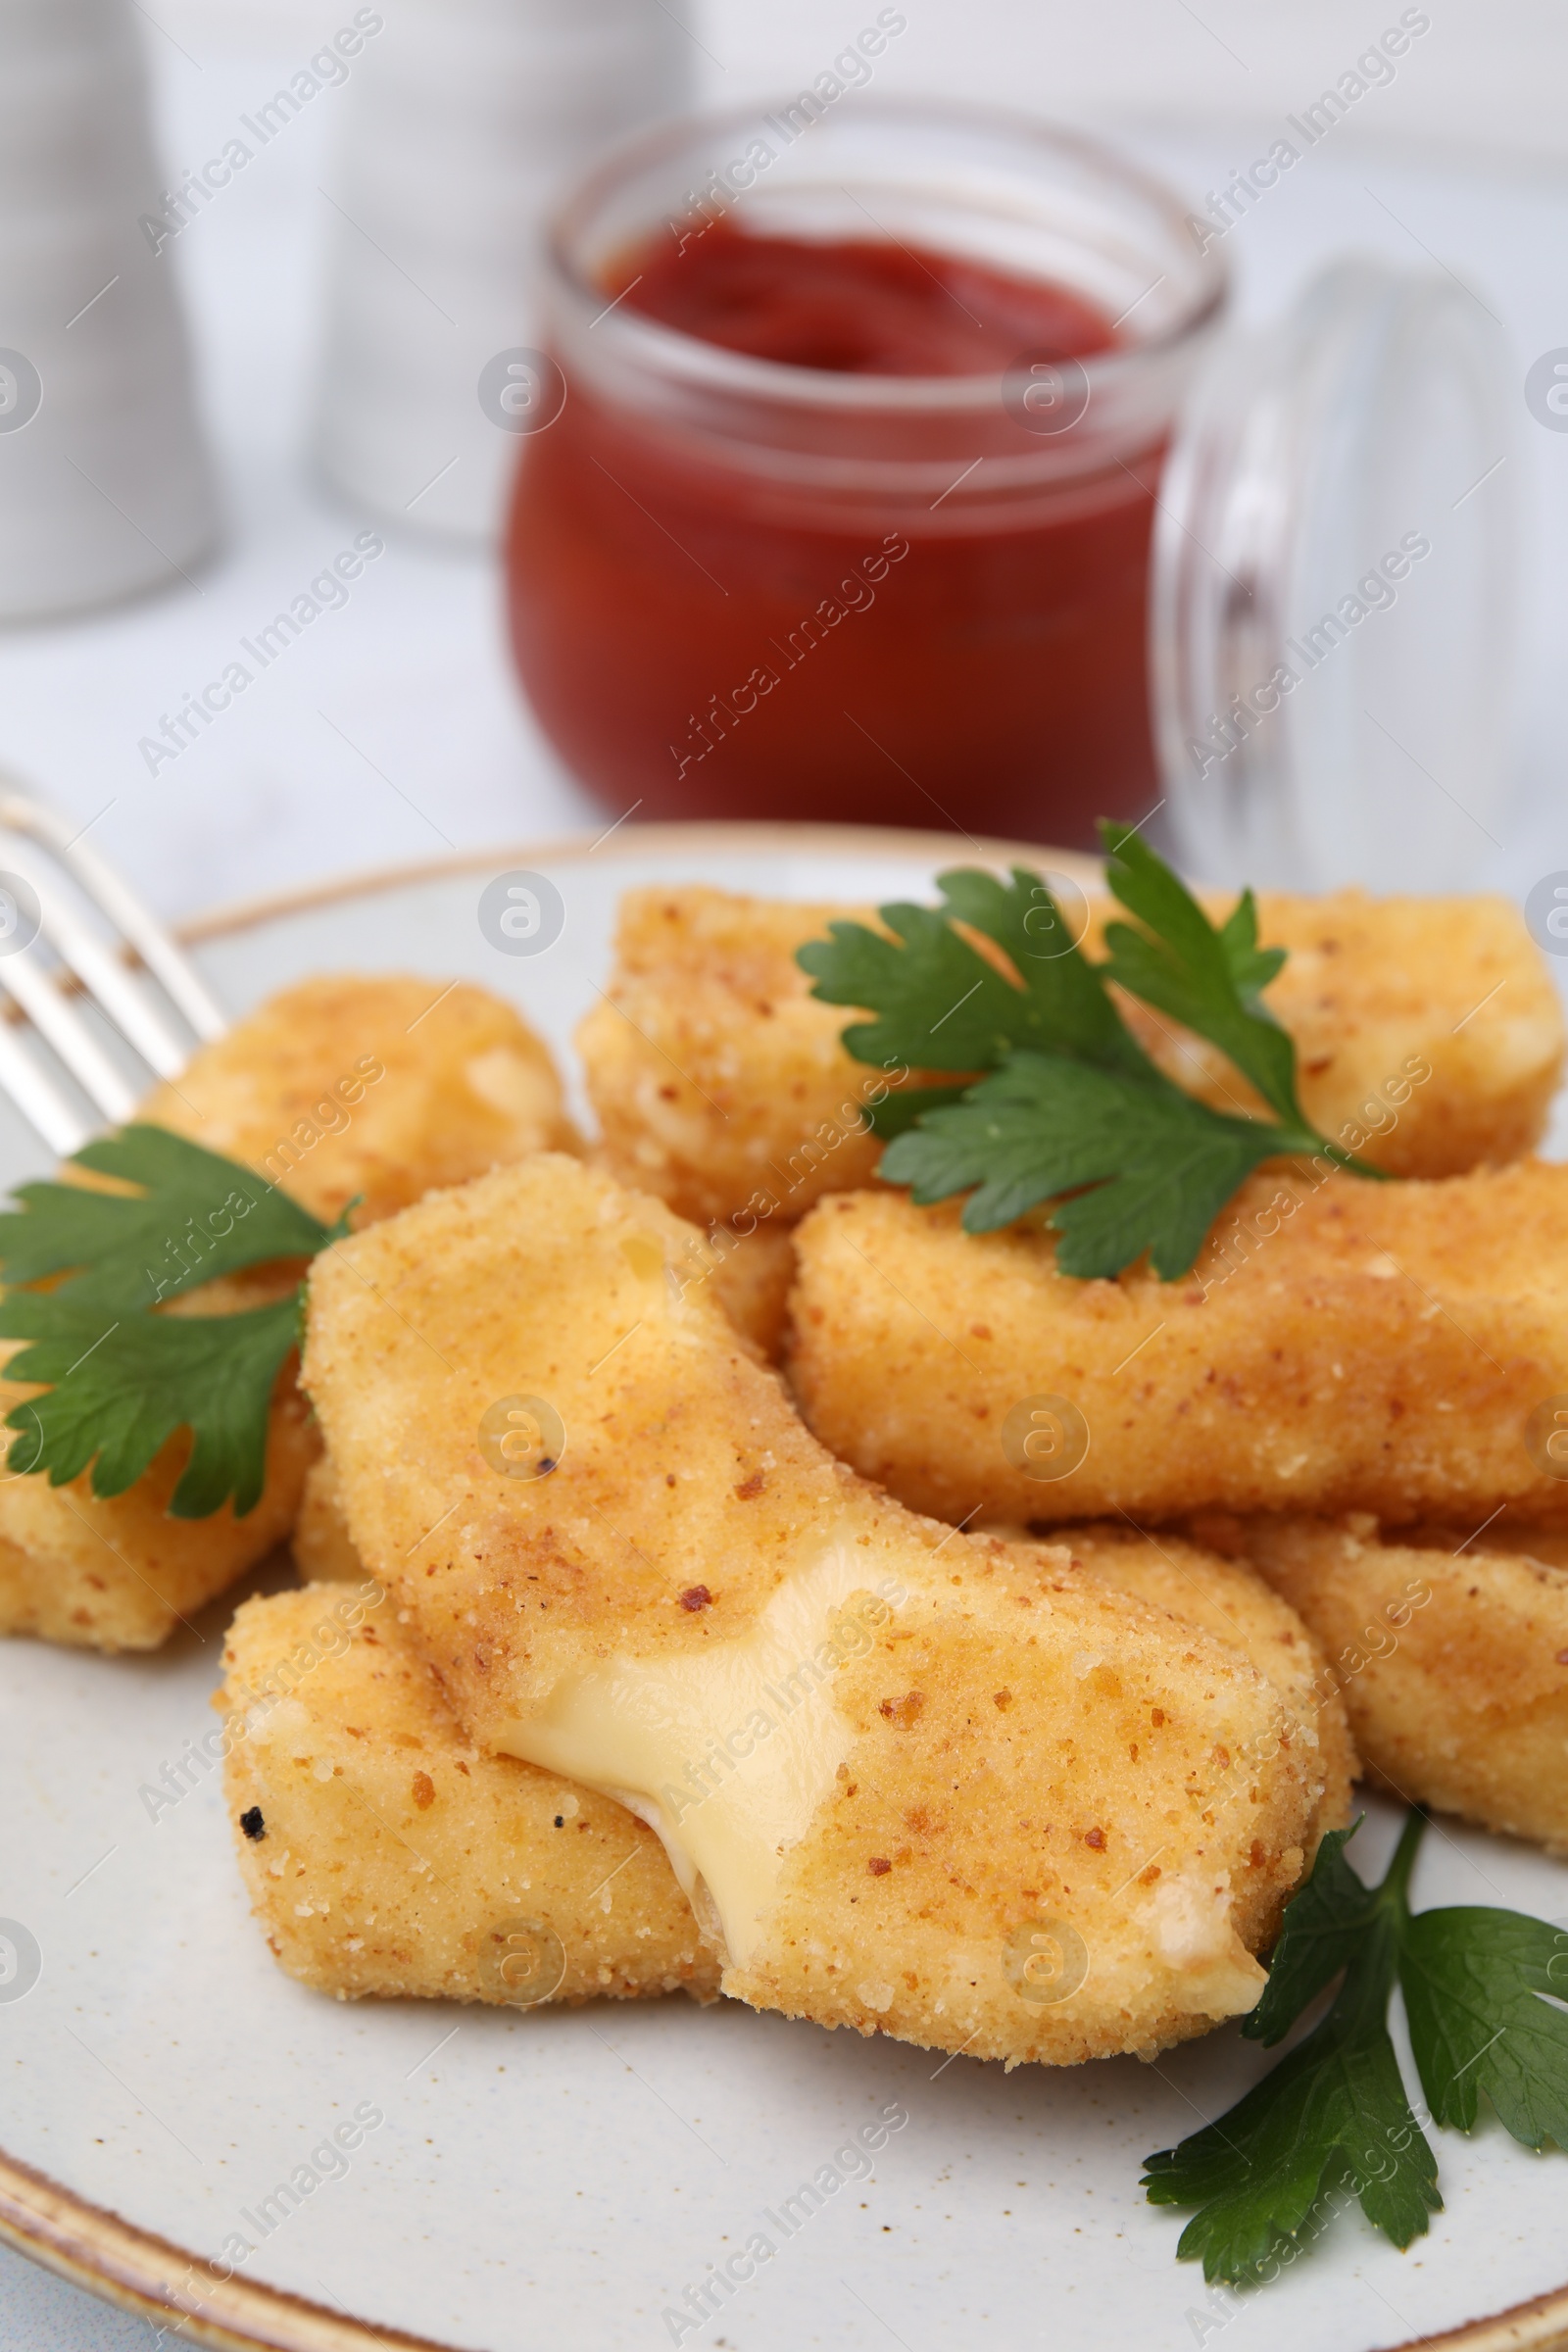 Photo of Plate with tasty fried mozzarella sticks and parsley on table, closeup